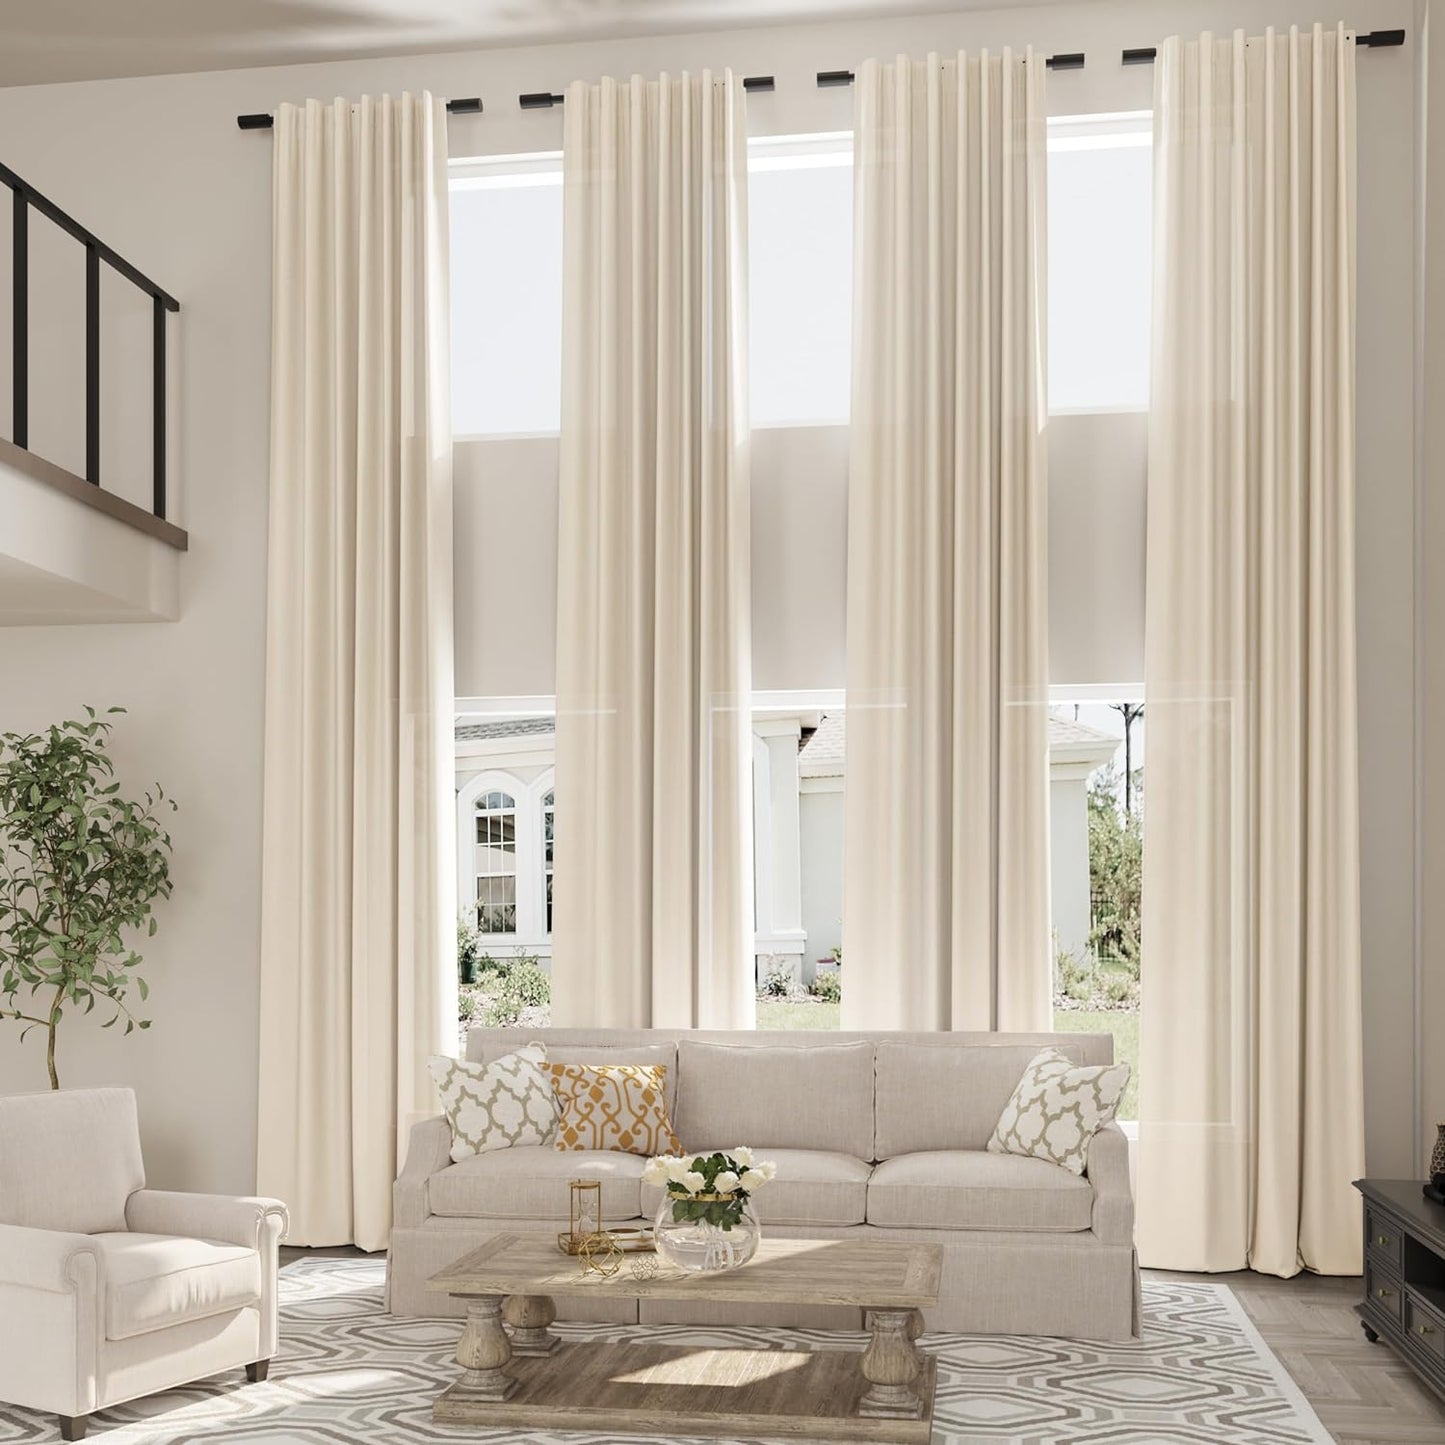 132 Inch Linen Curtains for High Ceiling Living Room Back Tab Hooks Pinch Pleat Custom Made Drape Semi Sheer Extra Long Curtain 132 Inches Long for 2 Story Windows Sliding Door Cream Ivory Birch  Aersas Linen W52Xl216 